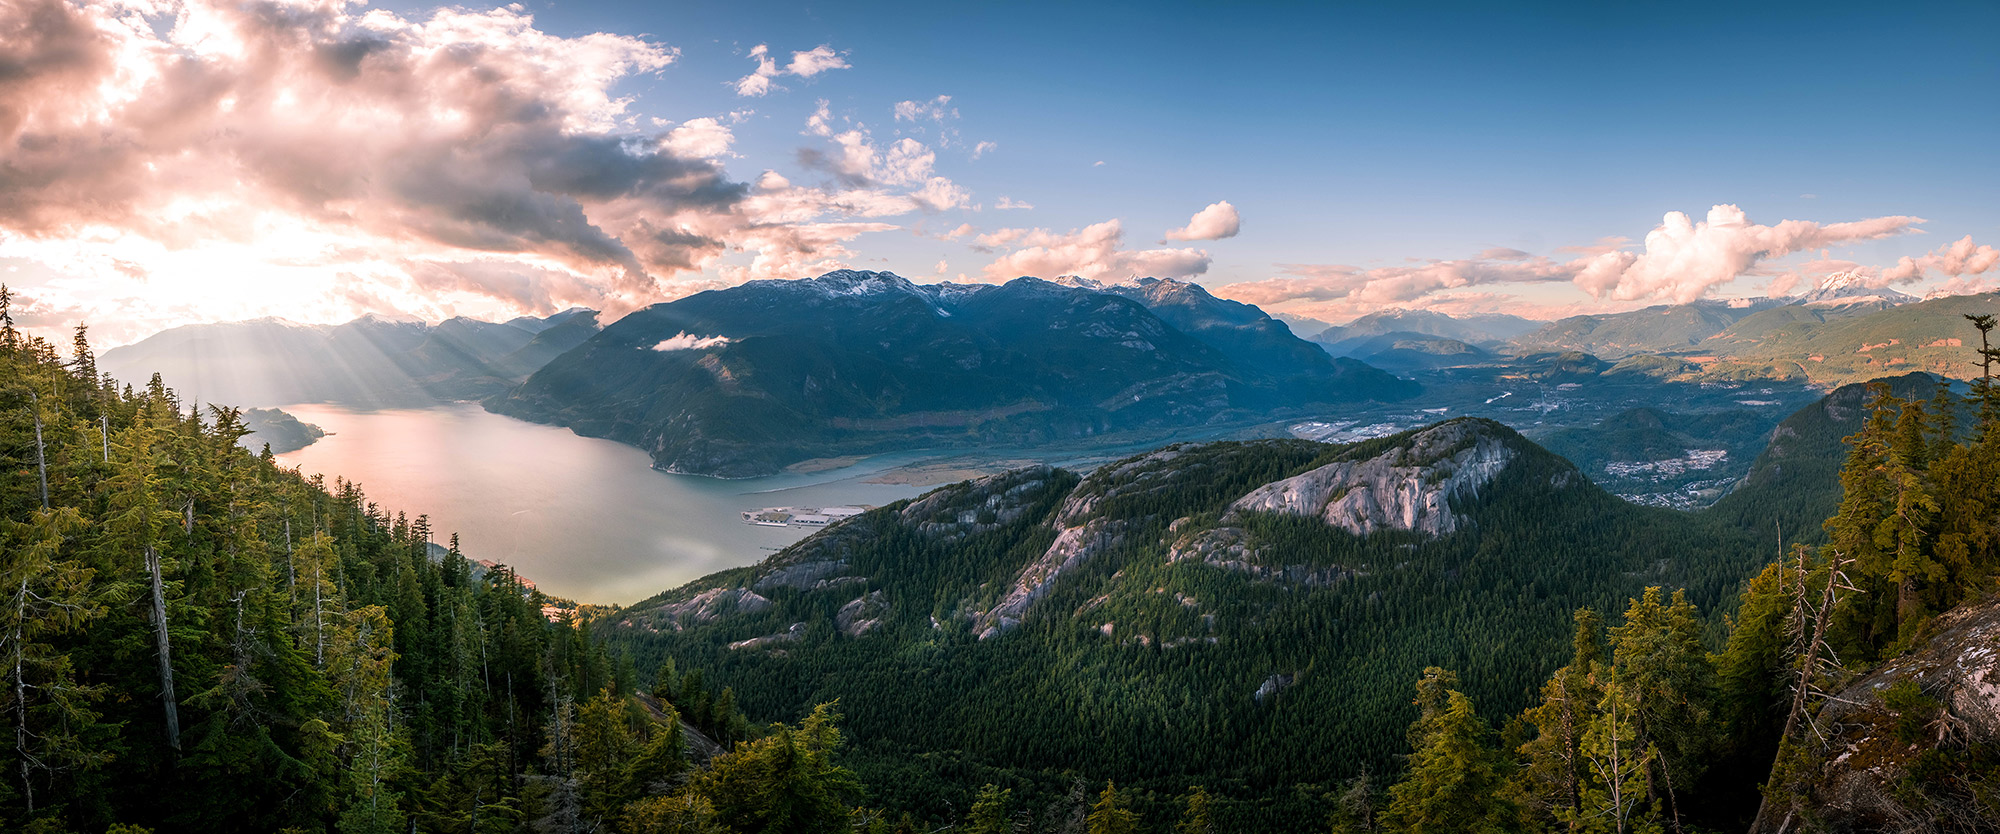 Squamish 2023 Vital Signs Report Released